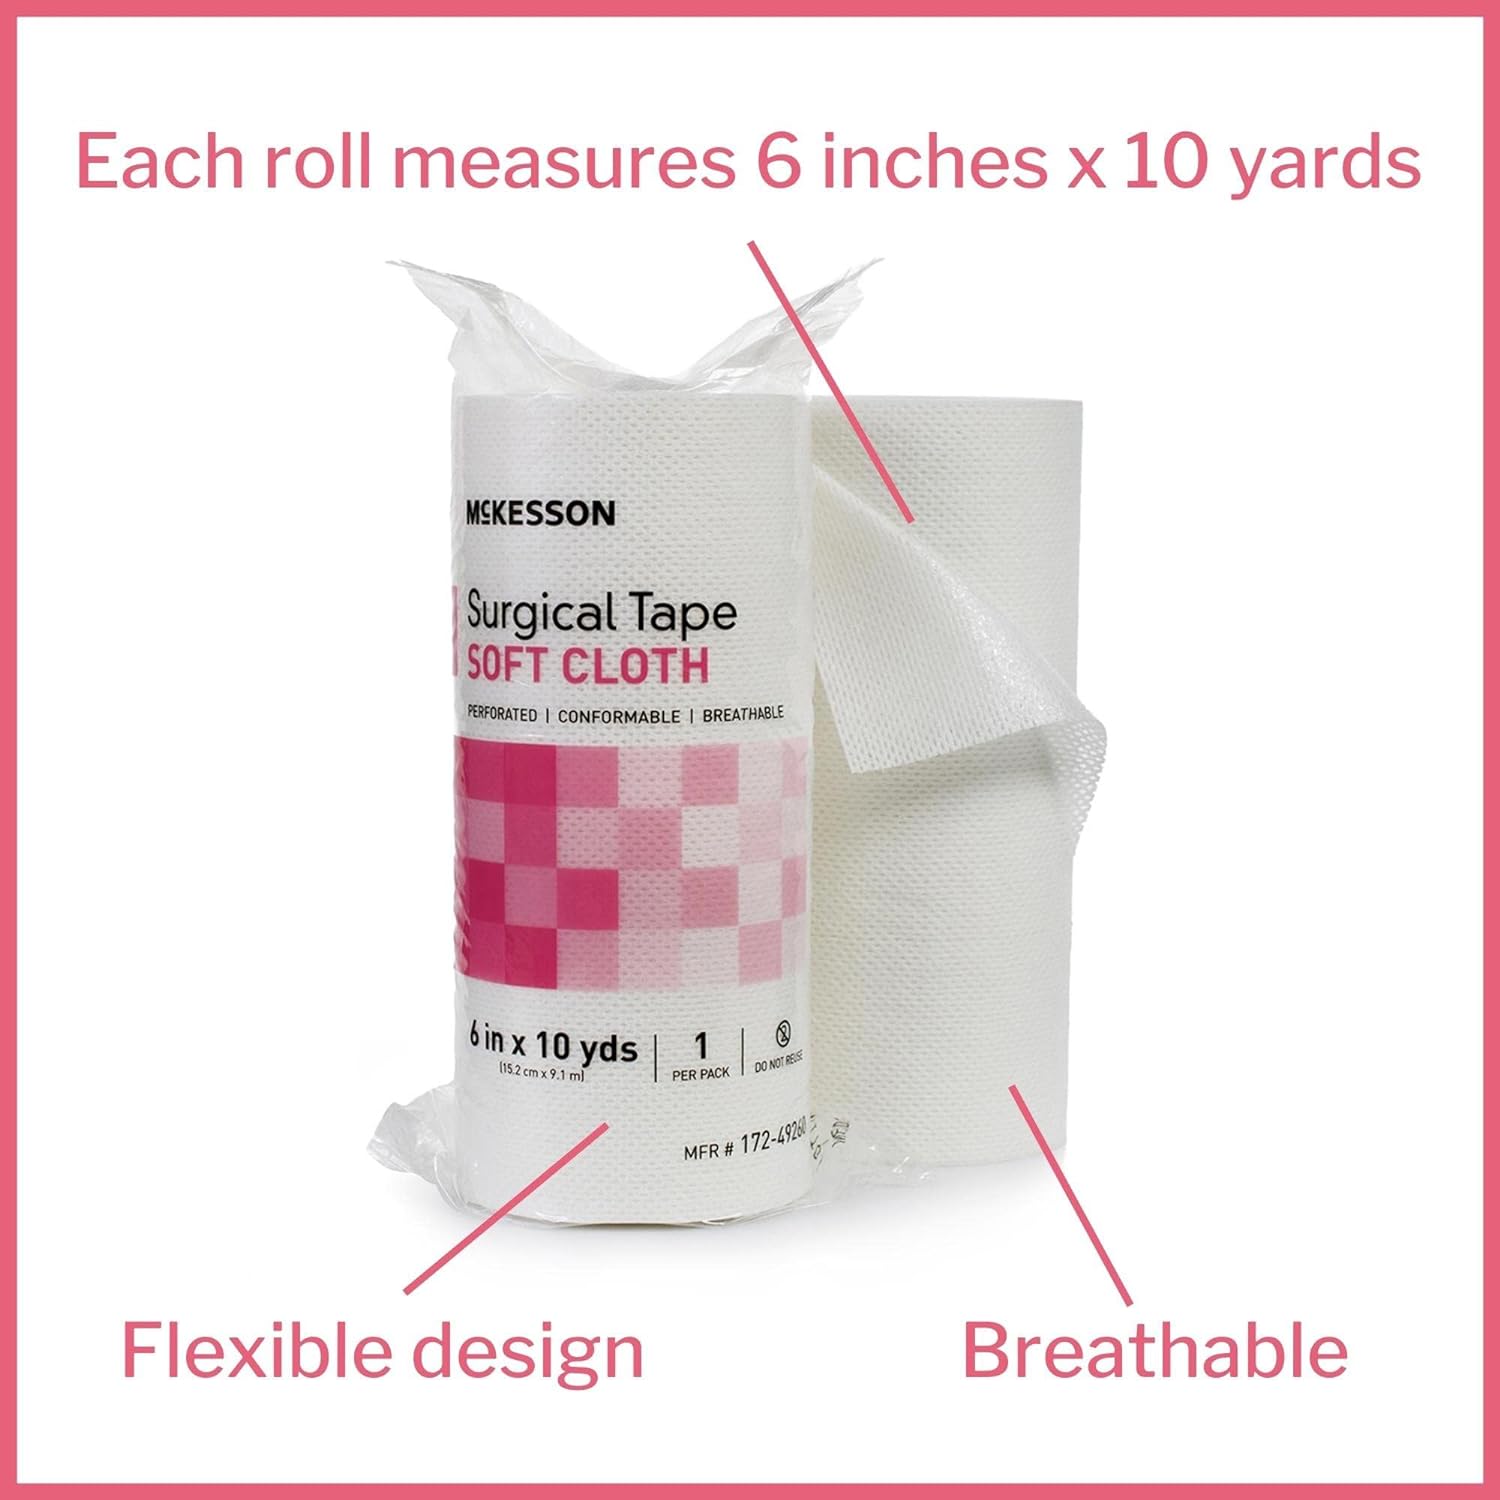 McKesson Surgical Tapes, Non-Sterile, Soft Cloth, Breathable, 6 in x 10 yd, 1 Roll, 6 Packs, 6 Total